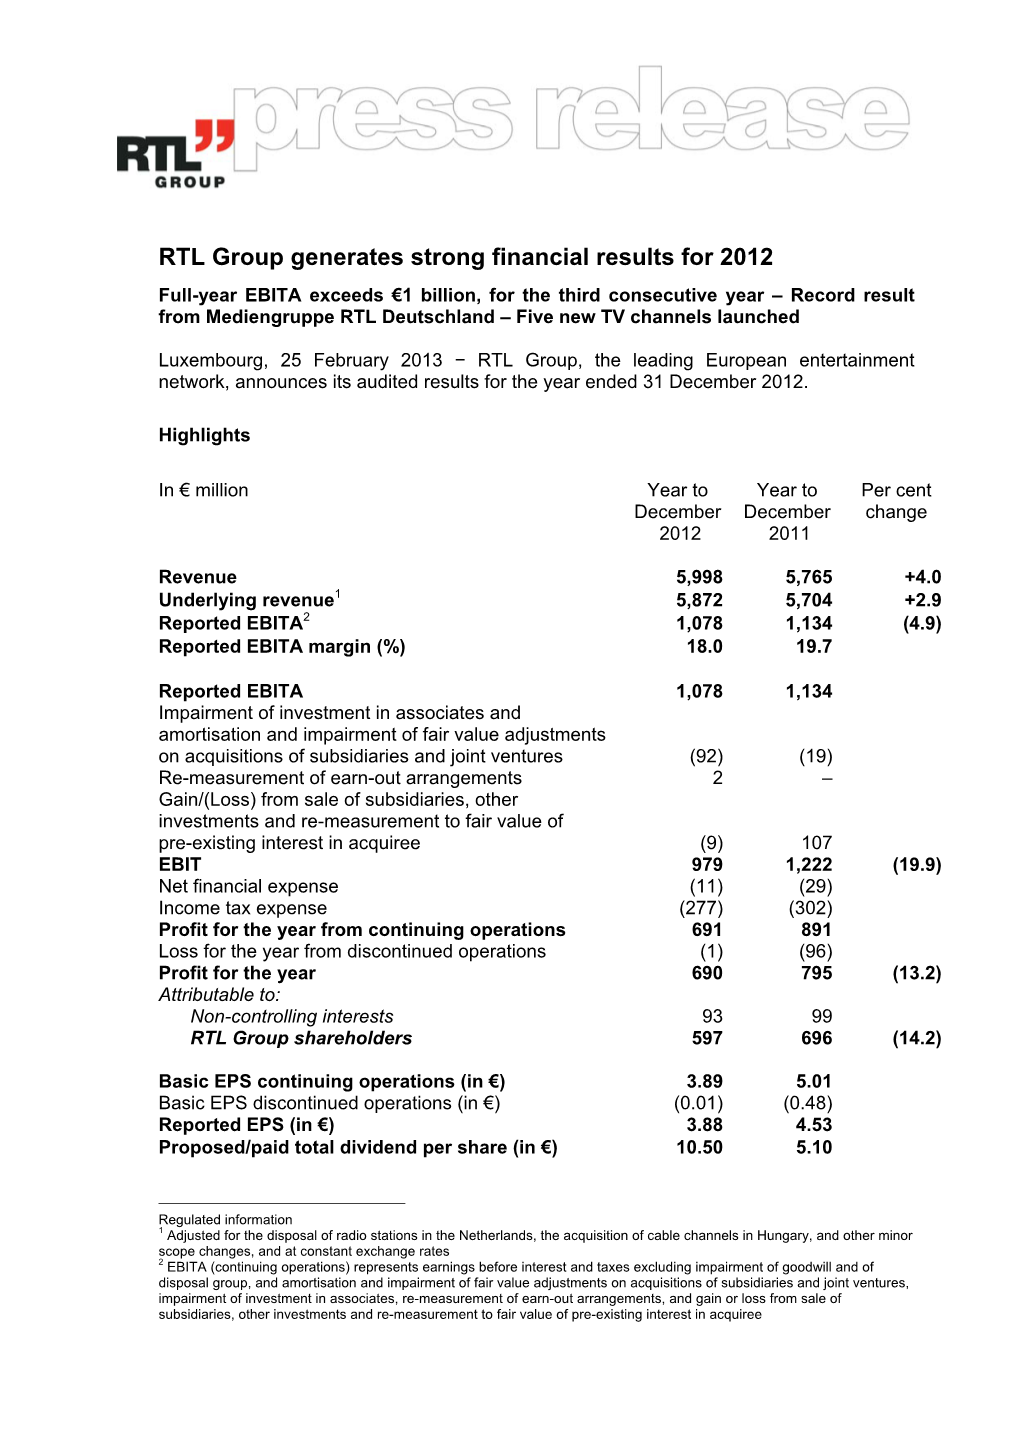 RTL Group Generates Strong Financial Results for 2012